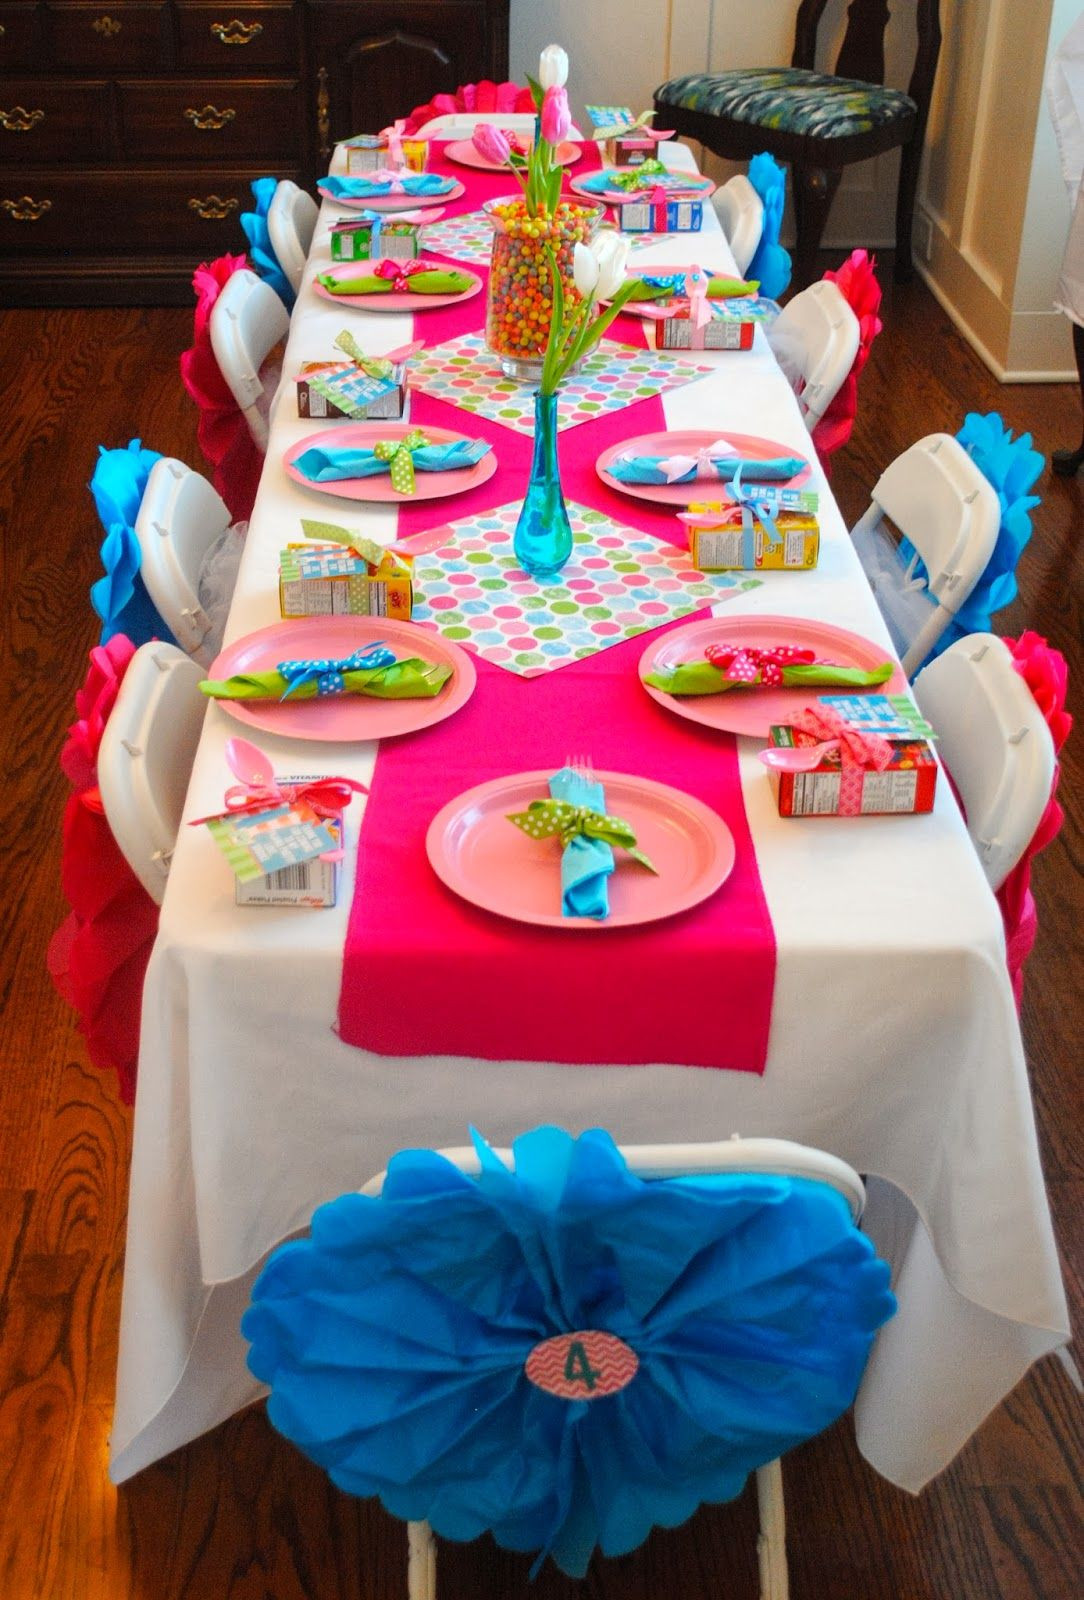 Four Year Old Birthday Party Ideas
 Jackie Fo Pajamas and Pancakes A 4 year old s fabulous